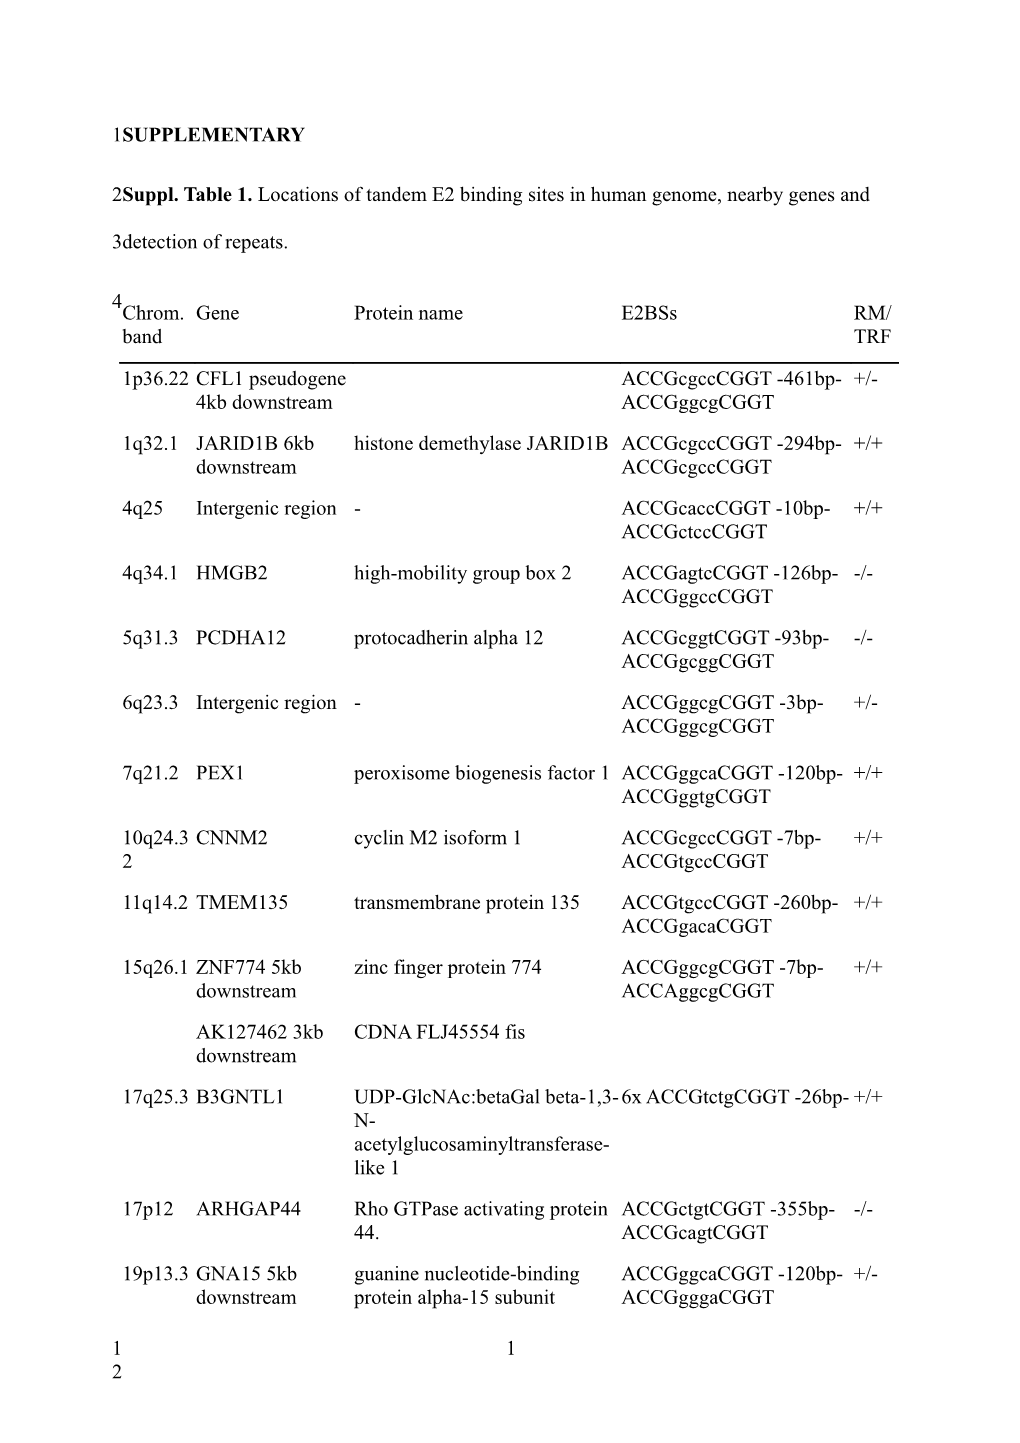 Suppl. Table 3. PCR Primers Used in Chip and Mrna Analysis